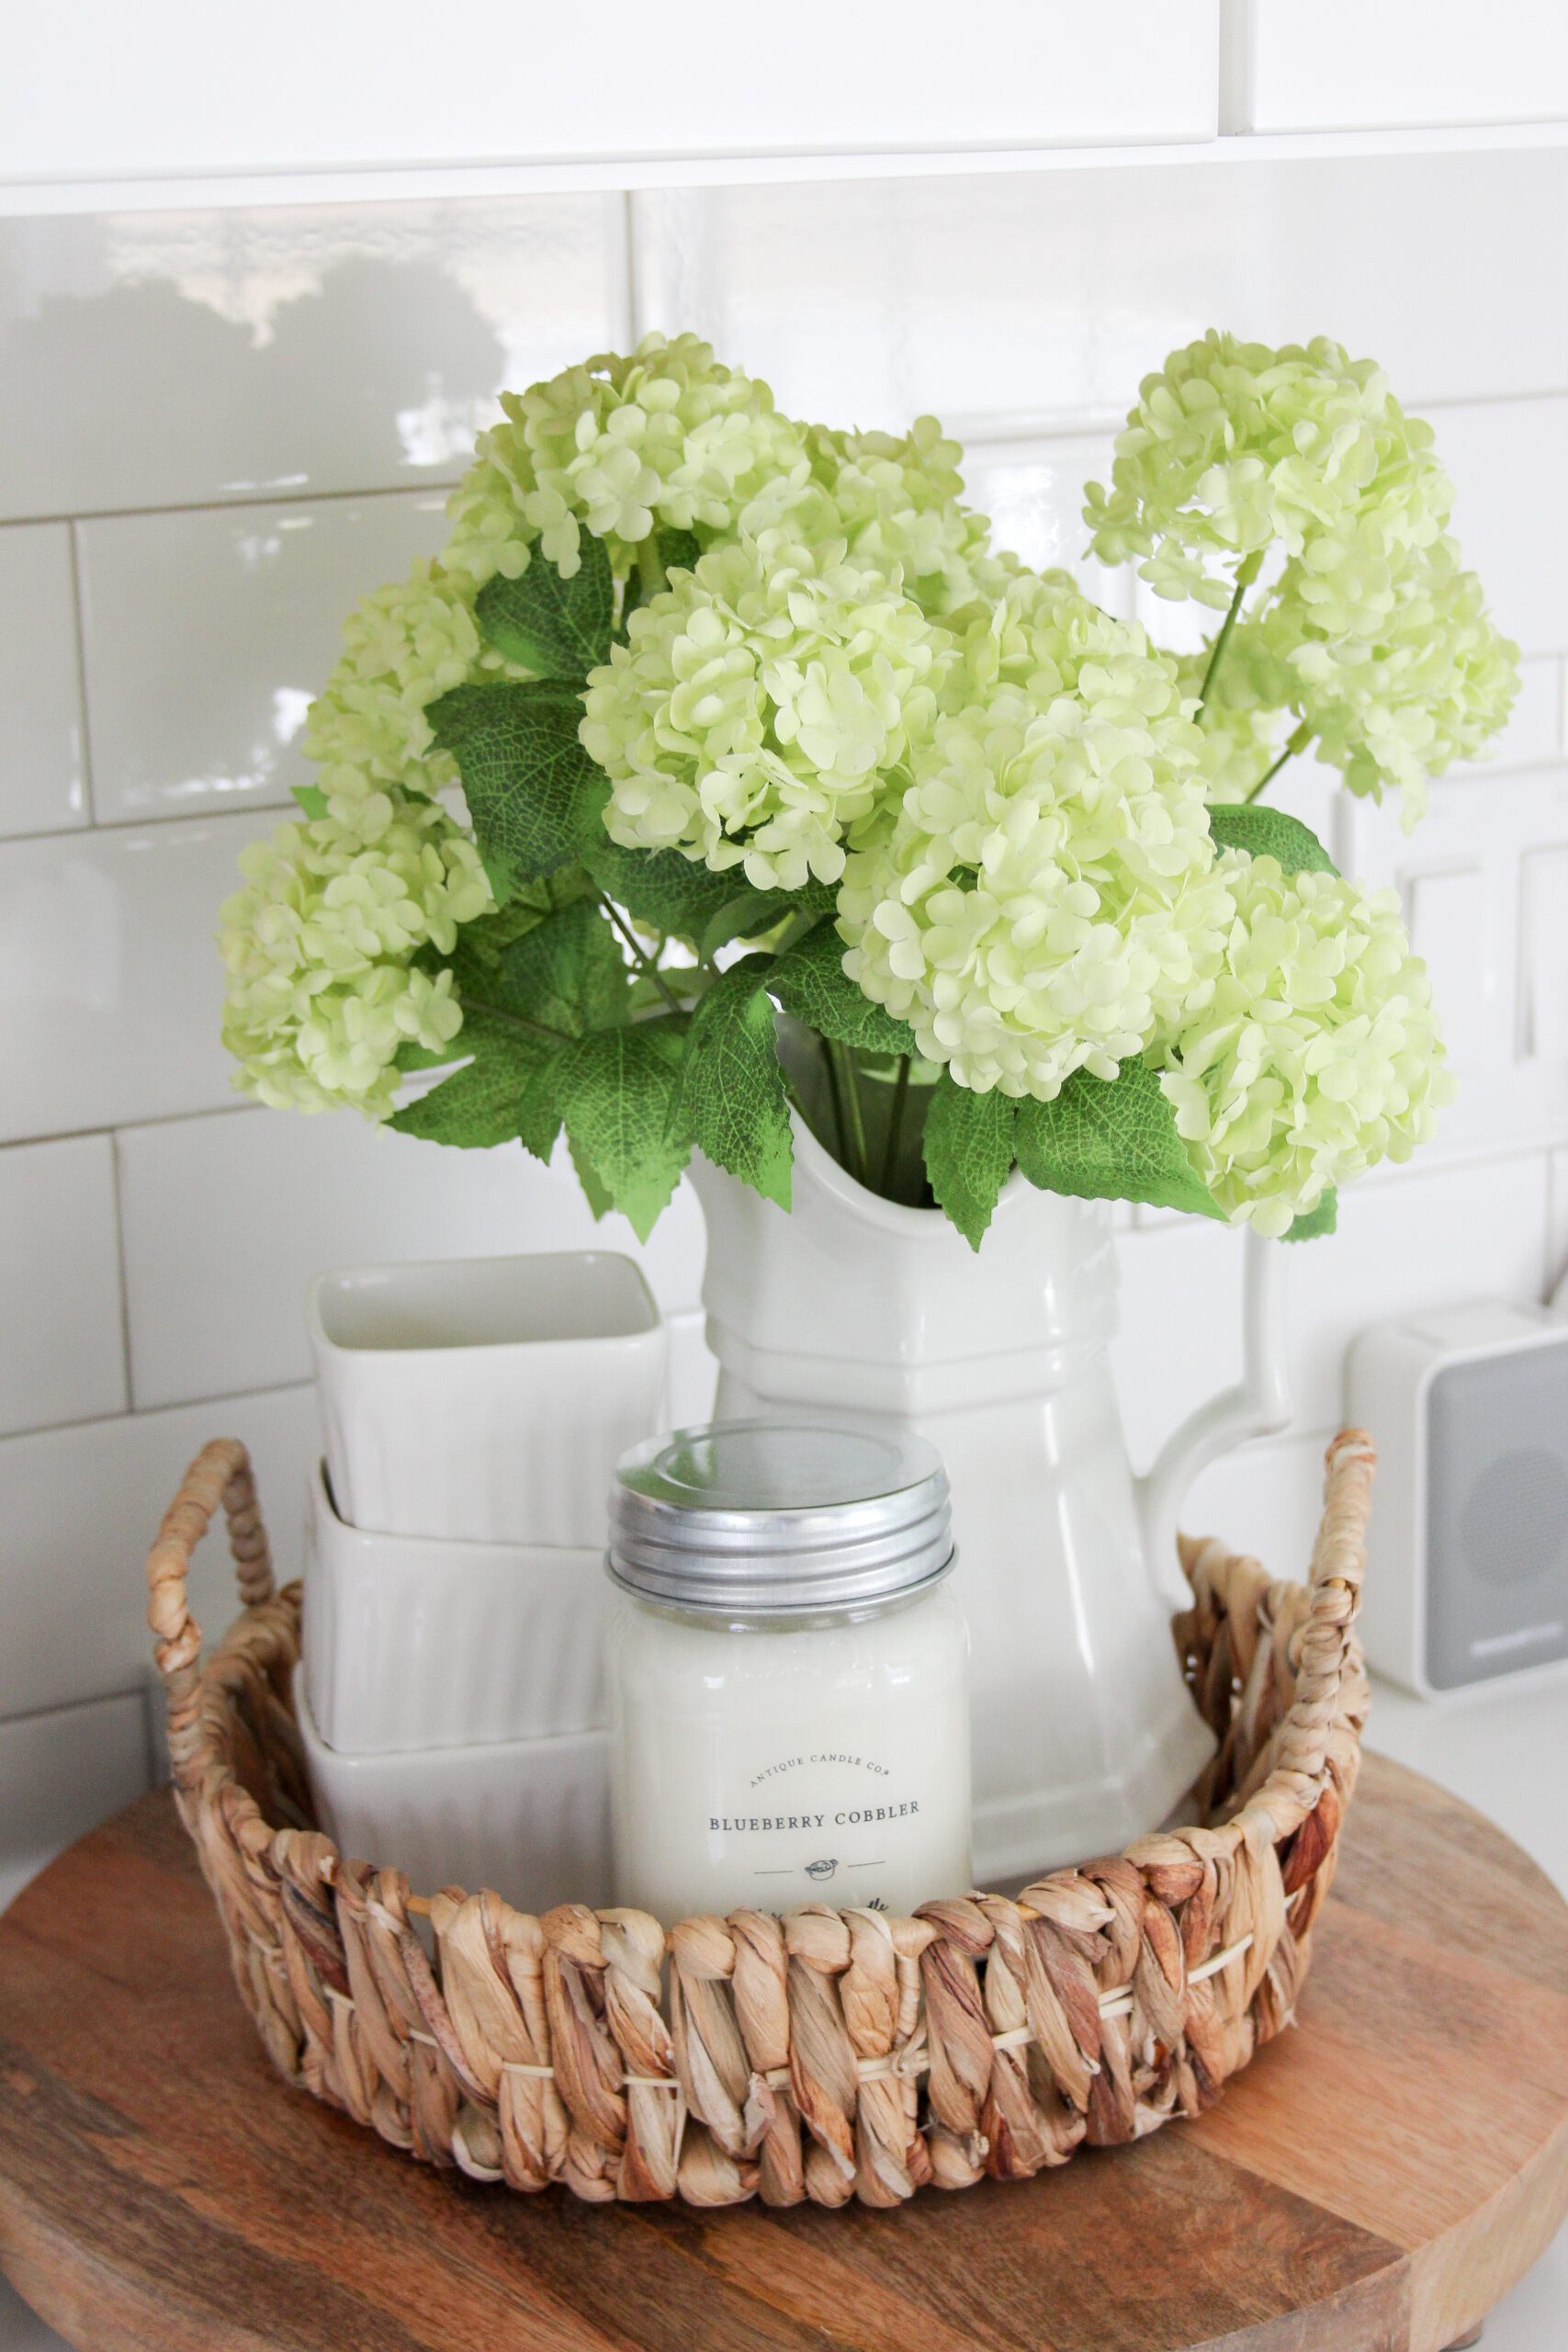 snowball hydrangeas in an ironstone pitcher with scalloped ramekins and a blueberry cobbler in a whicker seagrass basket